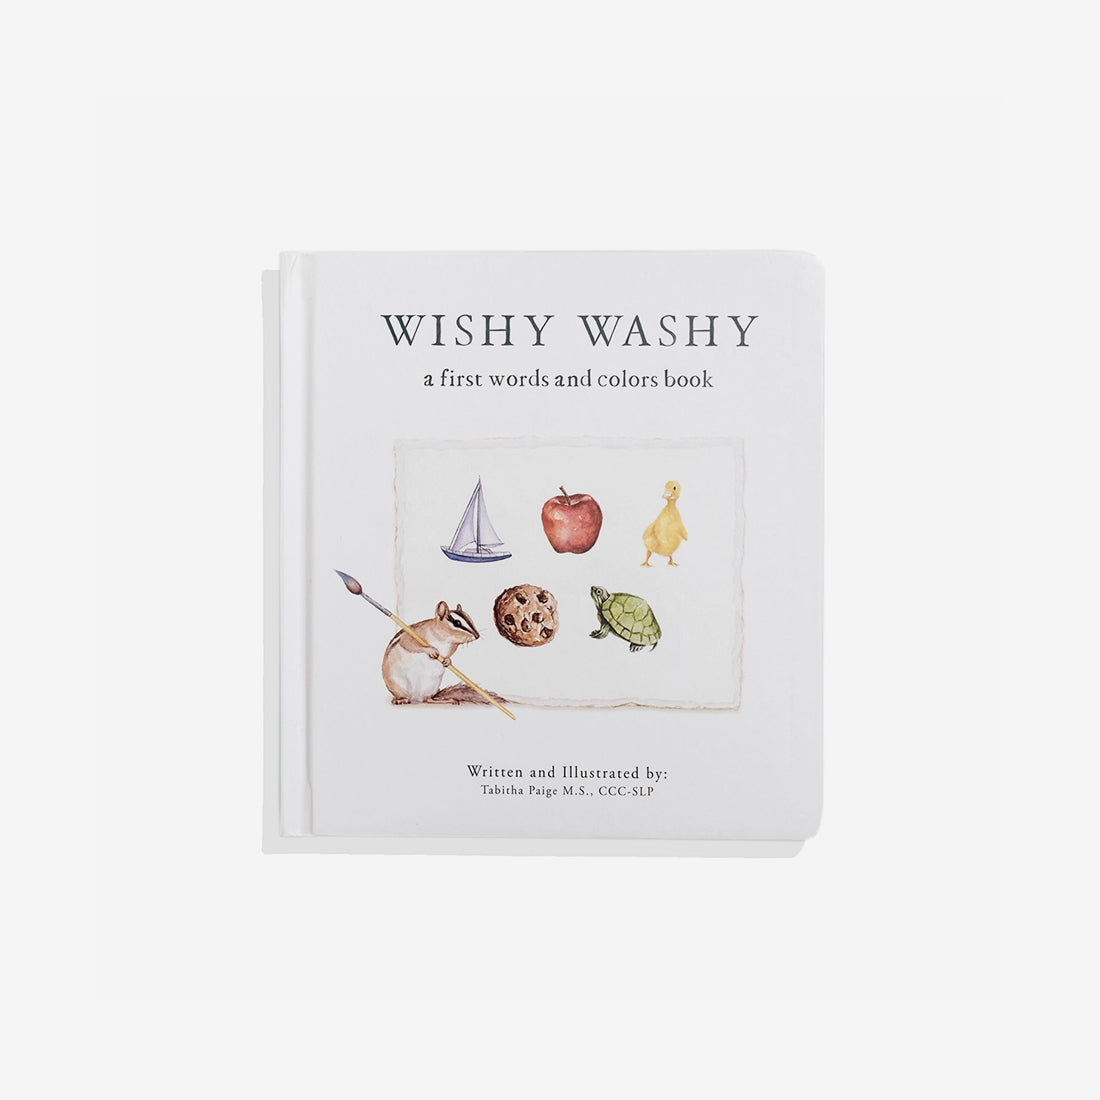 Wishy Washy - A Board Book of First Words & Colors